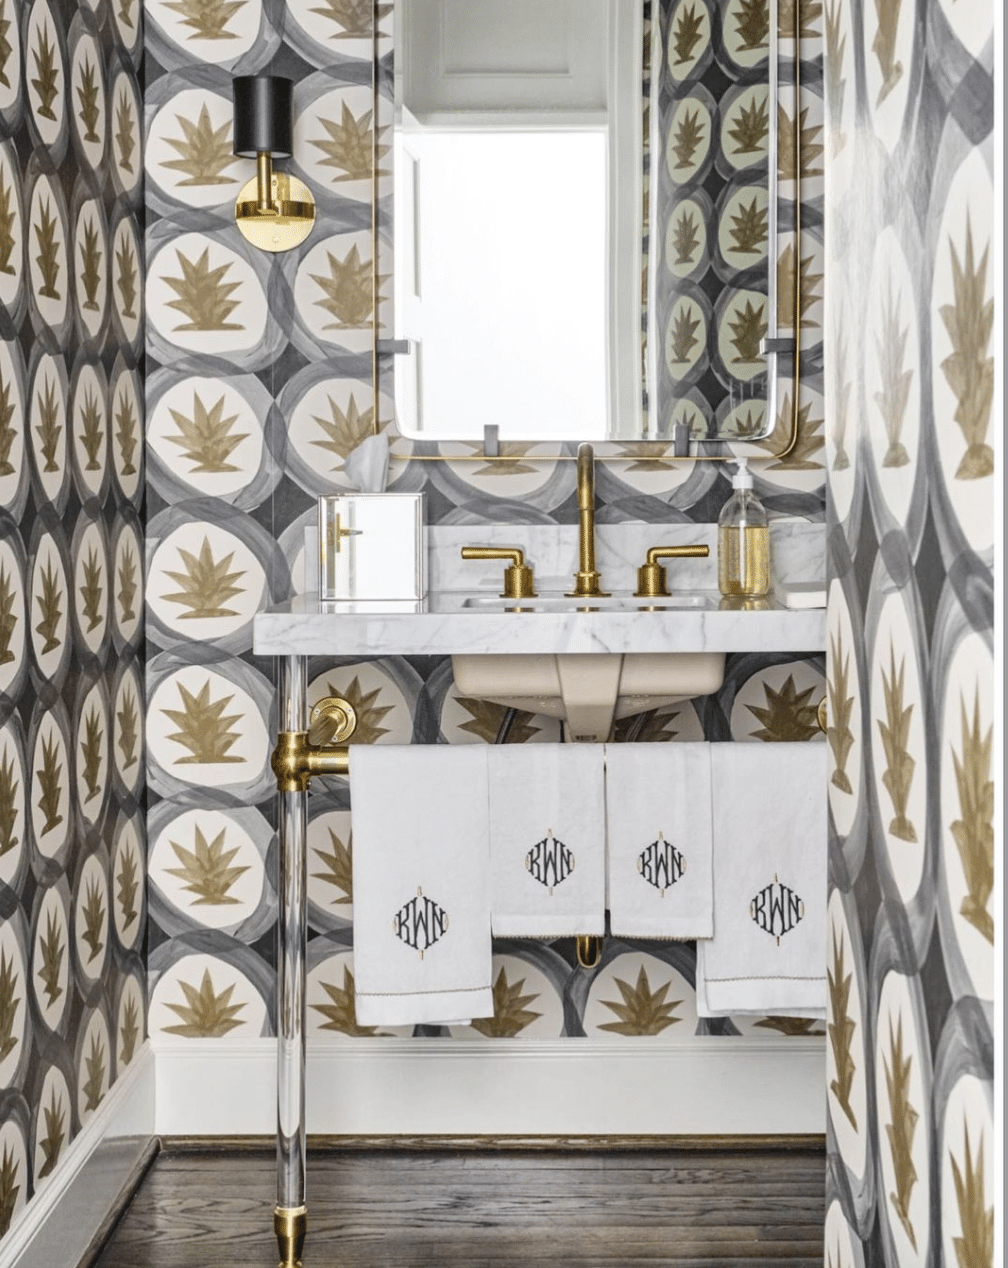 Mary Beth Wagner is an interior designer with a remarkable ability to turn powder rooms into captivating spaces bursting with pizazz. | Nathan Schroder Photography